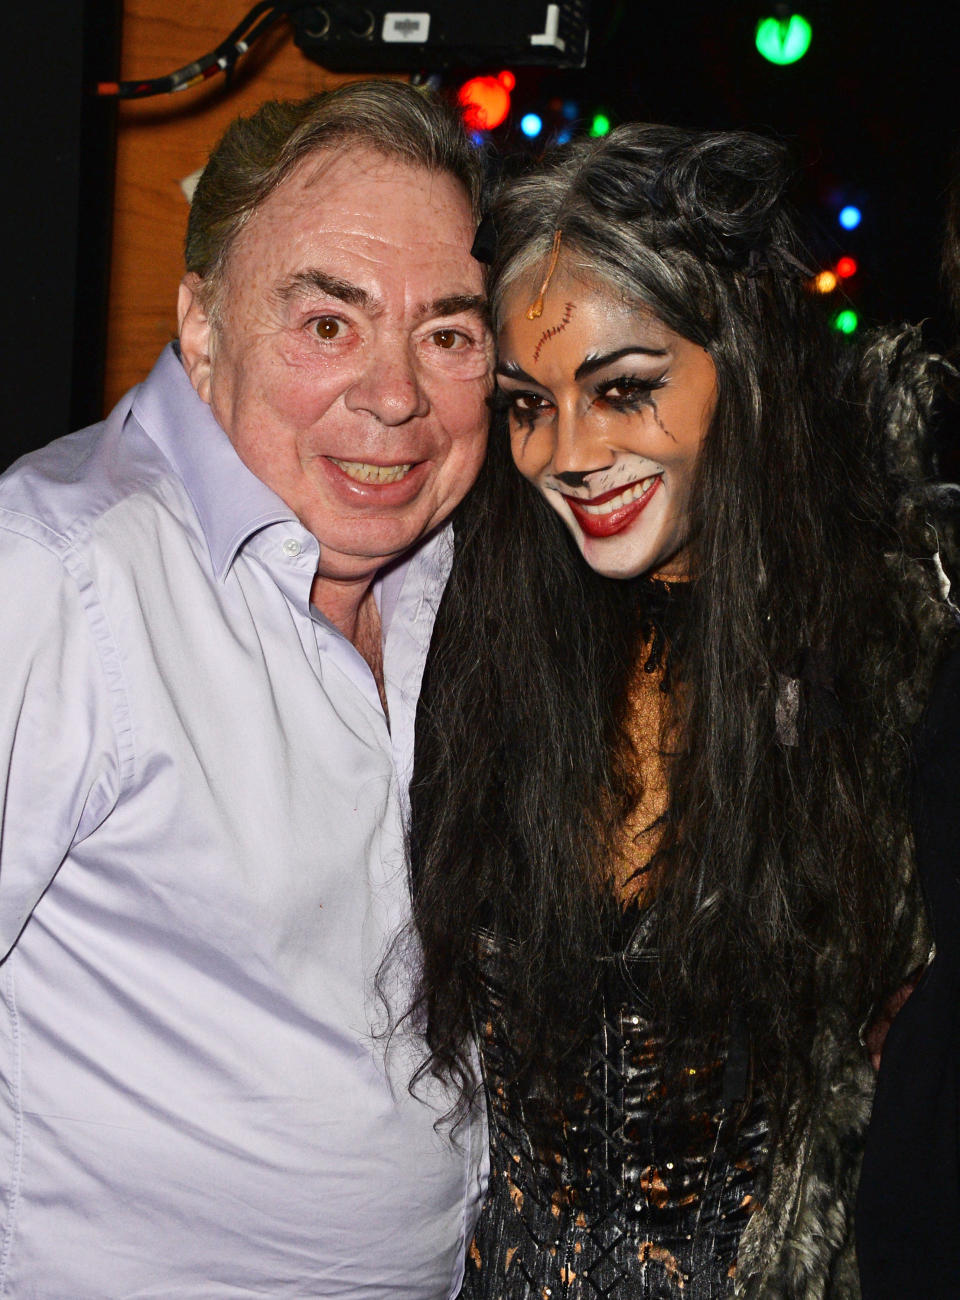 LONDON, ENGLAND - DECEMBER 11:  Lord Andrew Lloyd Webber (L) and Nicole Scherzinger pose backstage following the press night performance of "Cats" as Nicole Scherzinger joins the cast at the London Palladium on December 11, 2014 in London, England.  (Photo by David M. Benett/Getty Images)